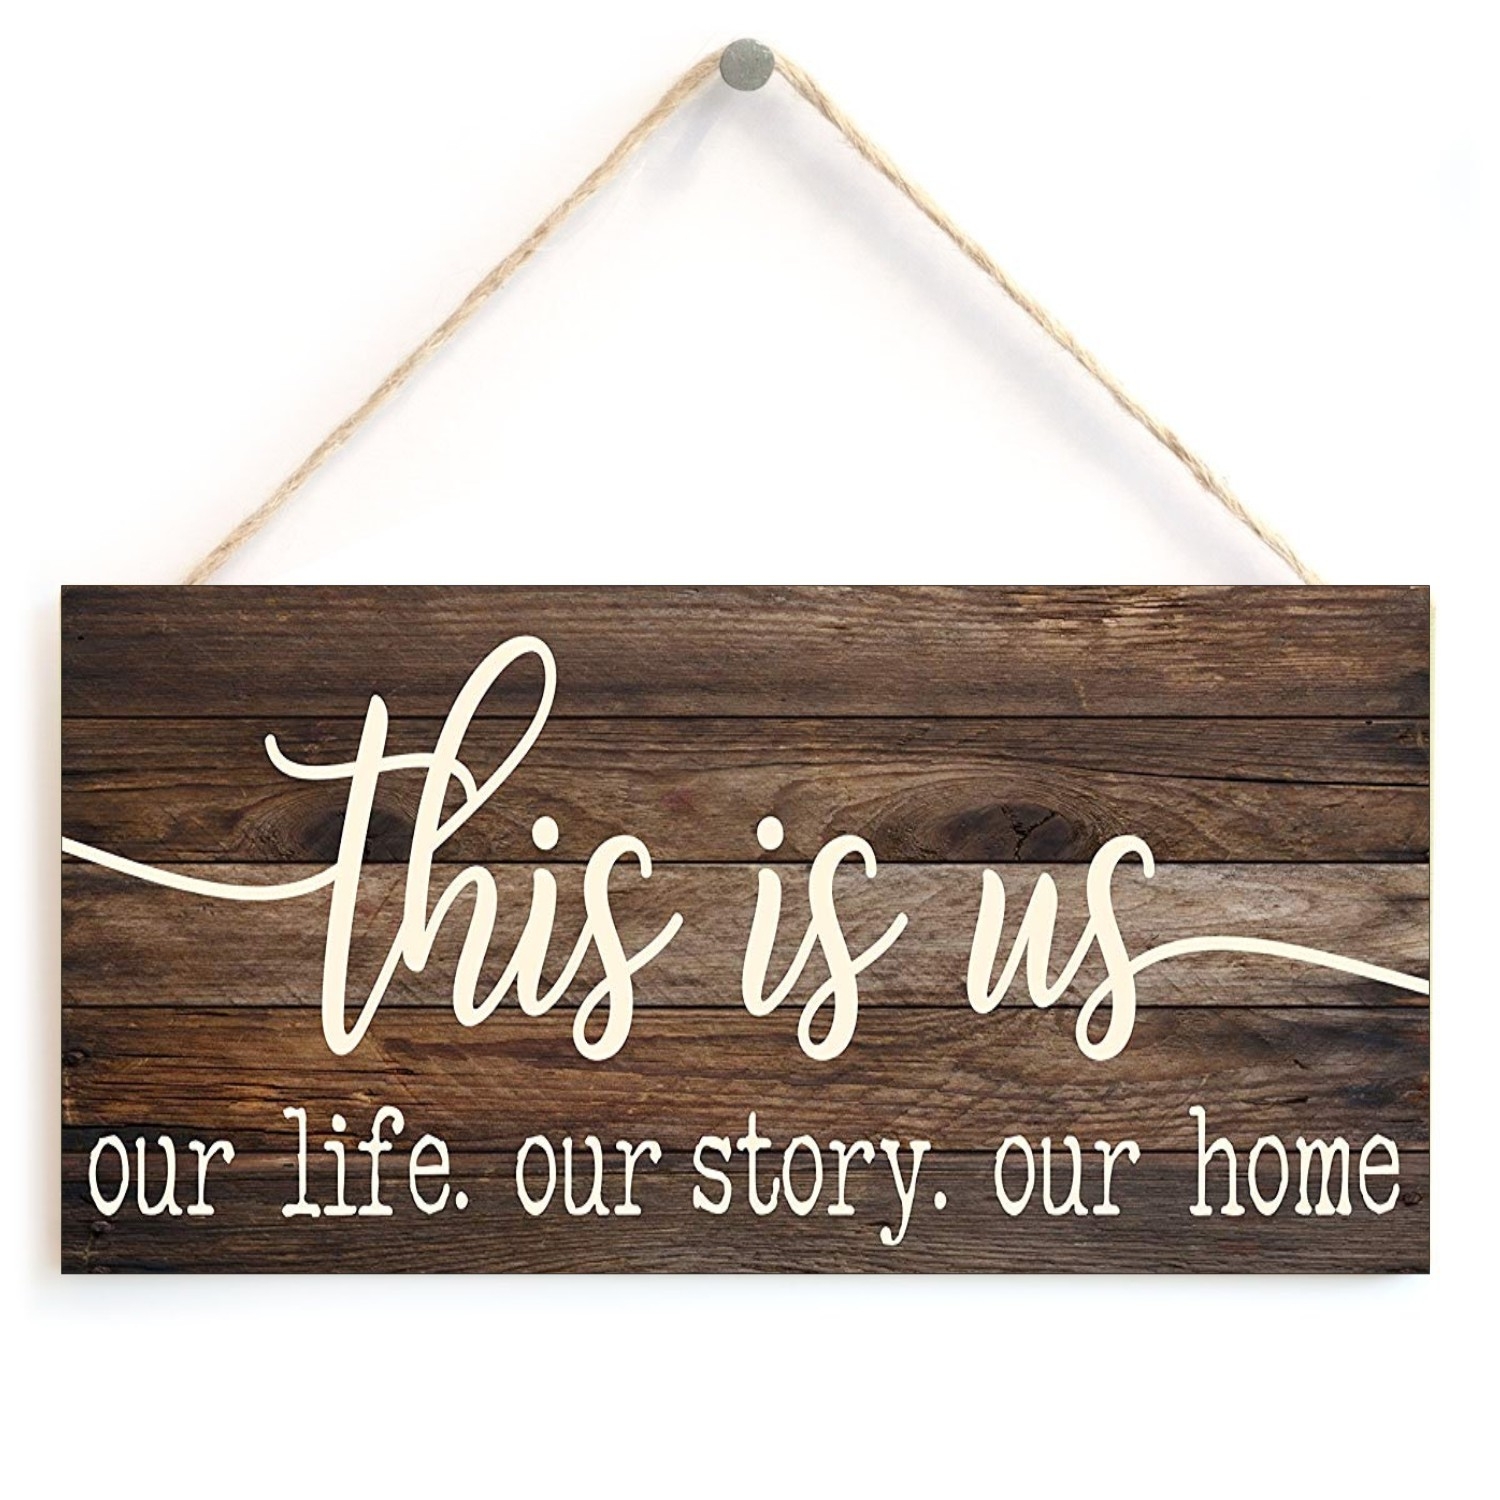 This is Us our Life our Story our Home country inspiration wall decor wood sign